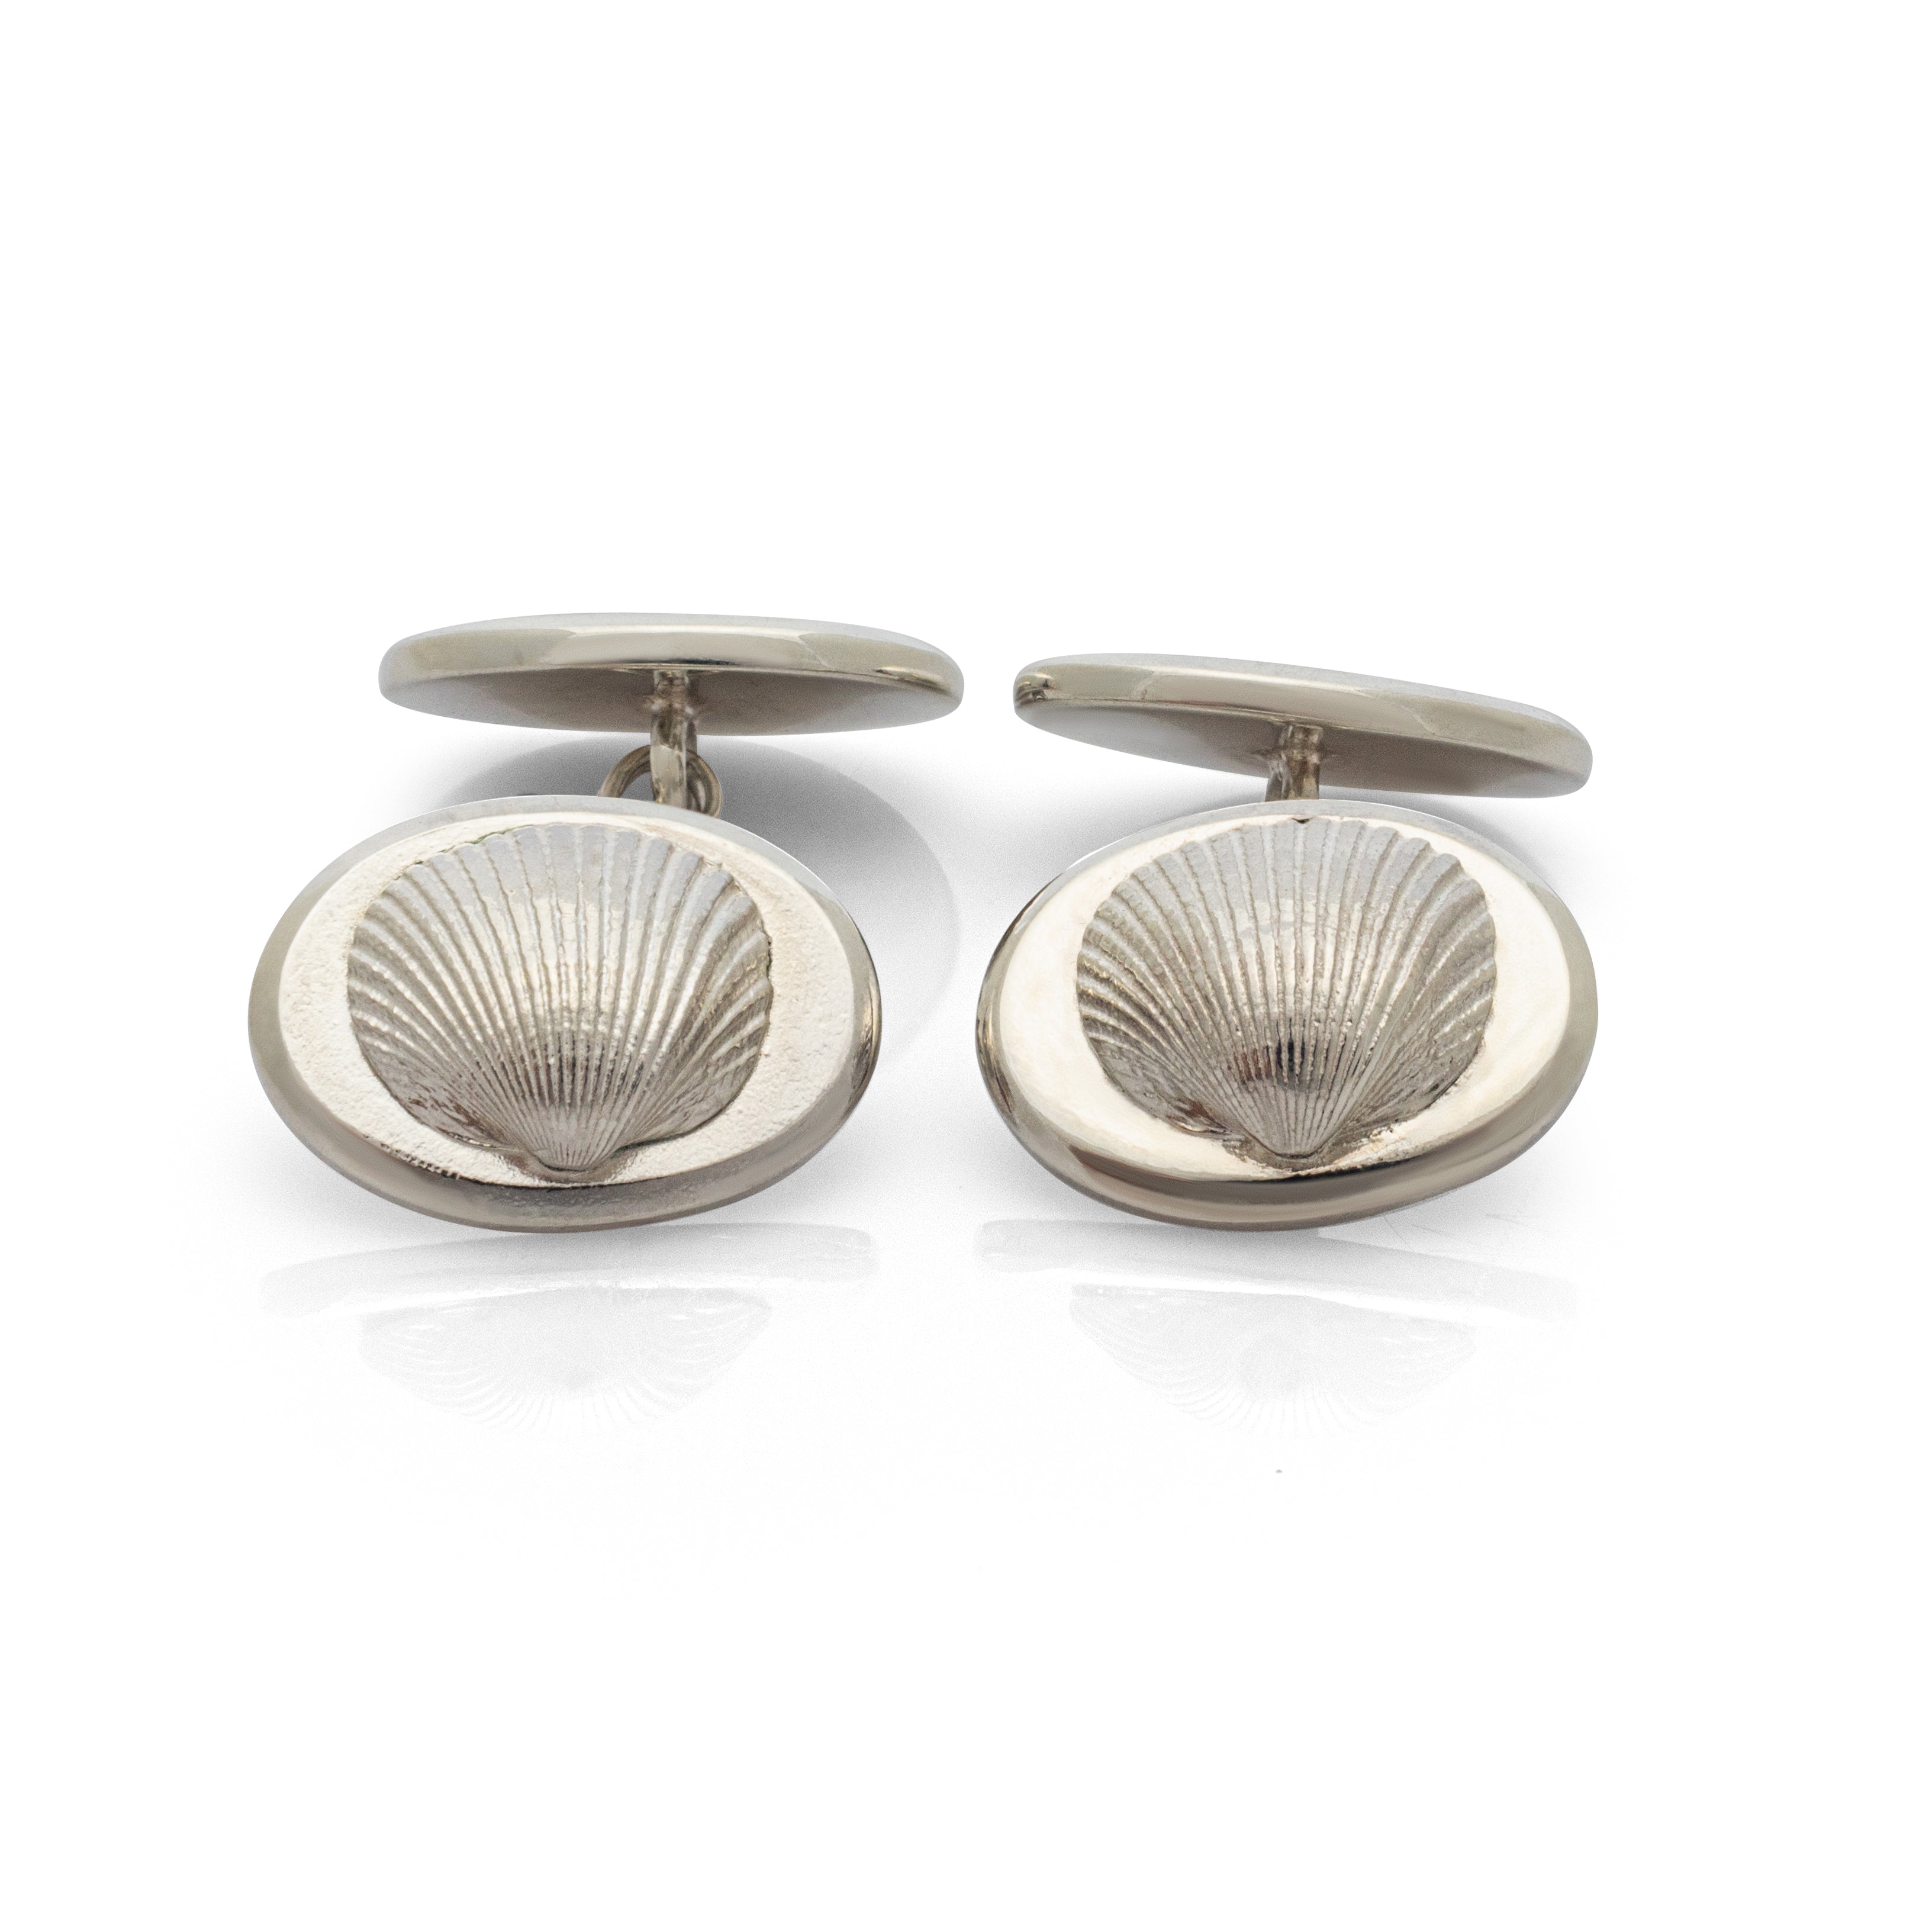 Old Hunstanton cufflinks. Old Hunstanton, Norfolk. Norfolk jewellery. Norfolk shell jewellery. Silver shell jewellery. Those Happy Places. Serena Ansell Jewellery.